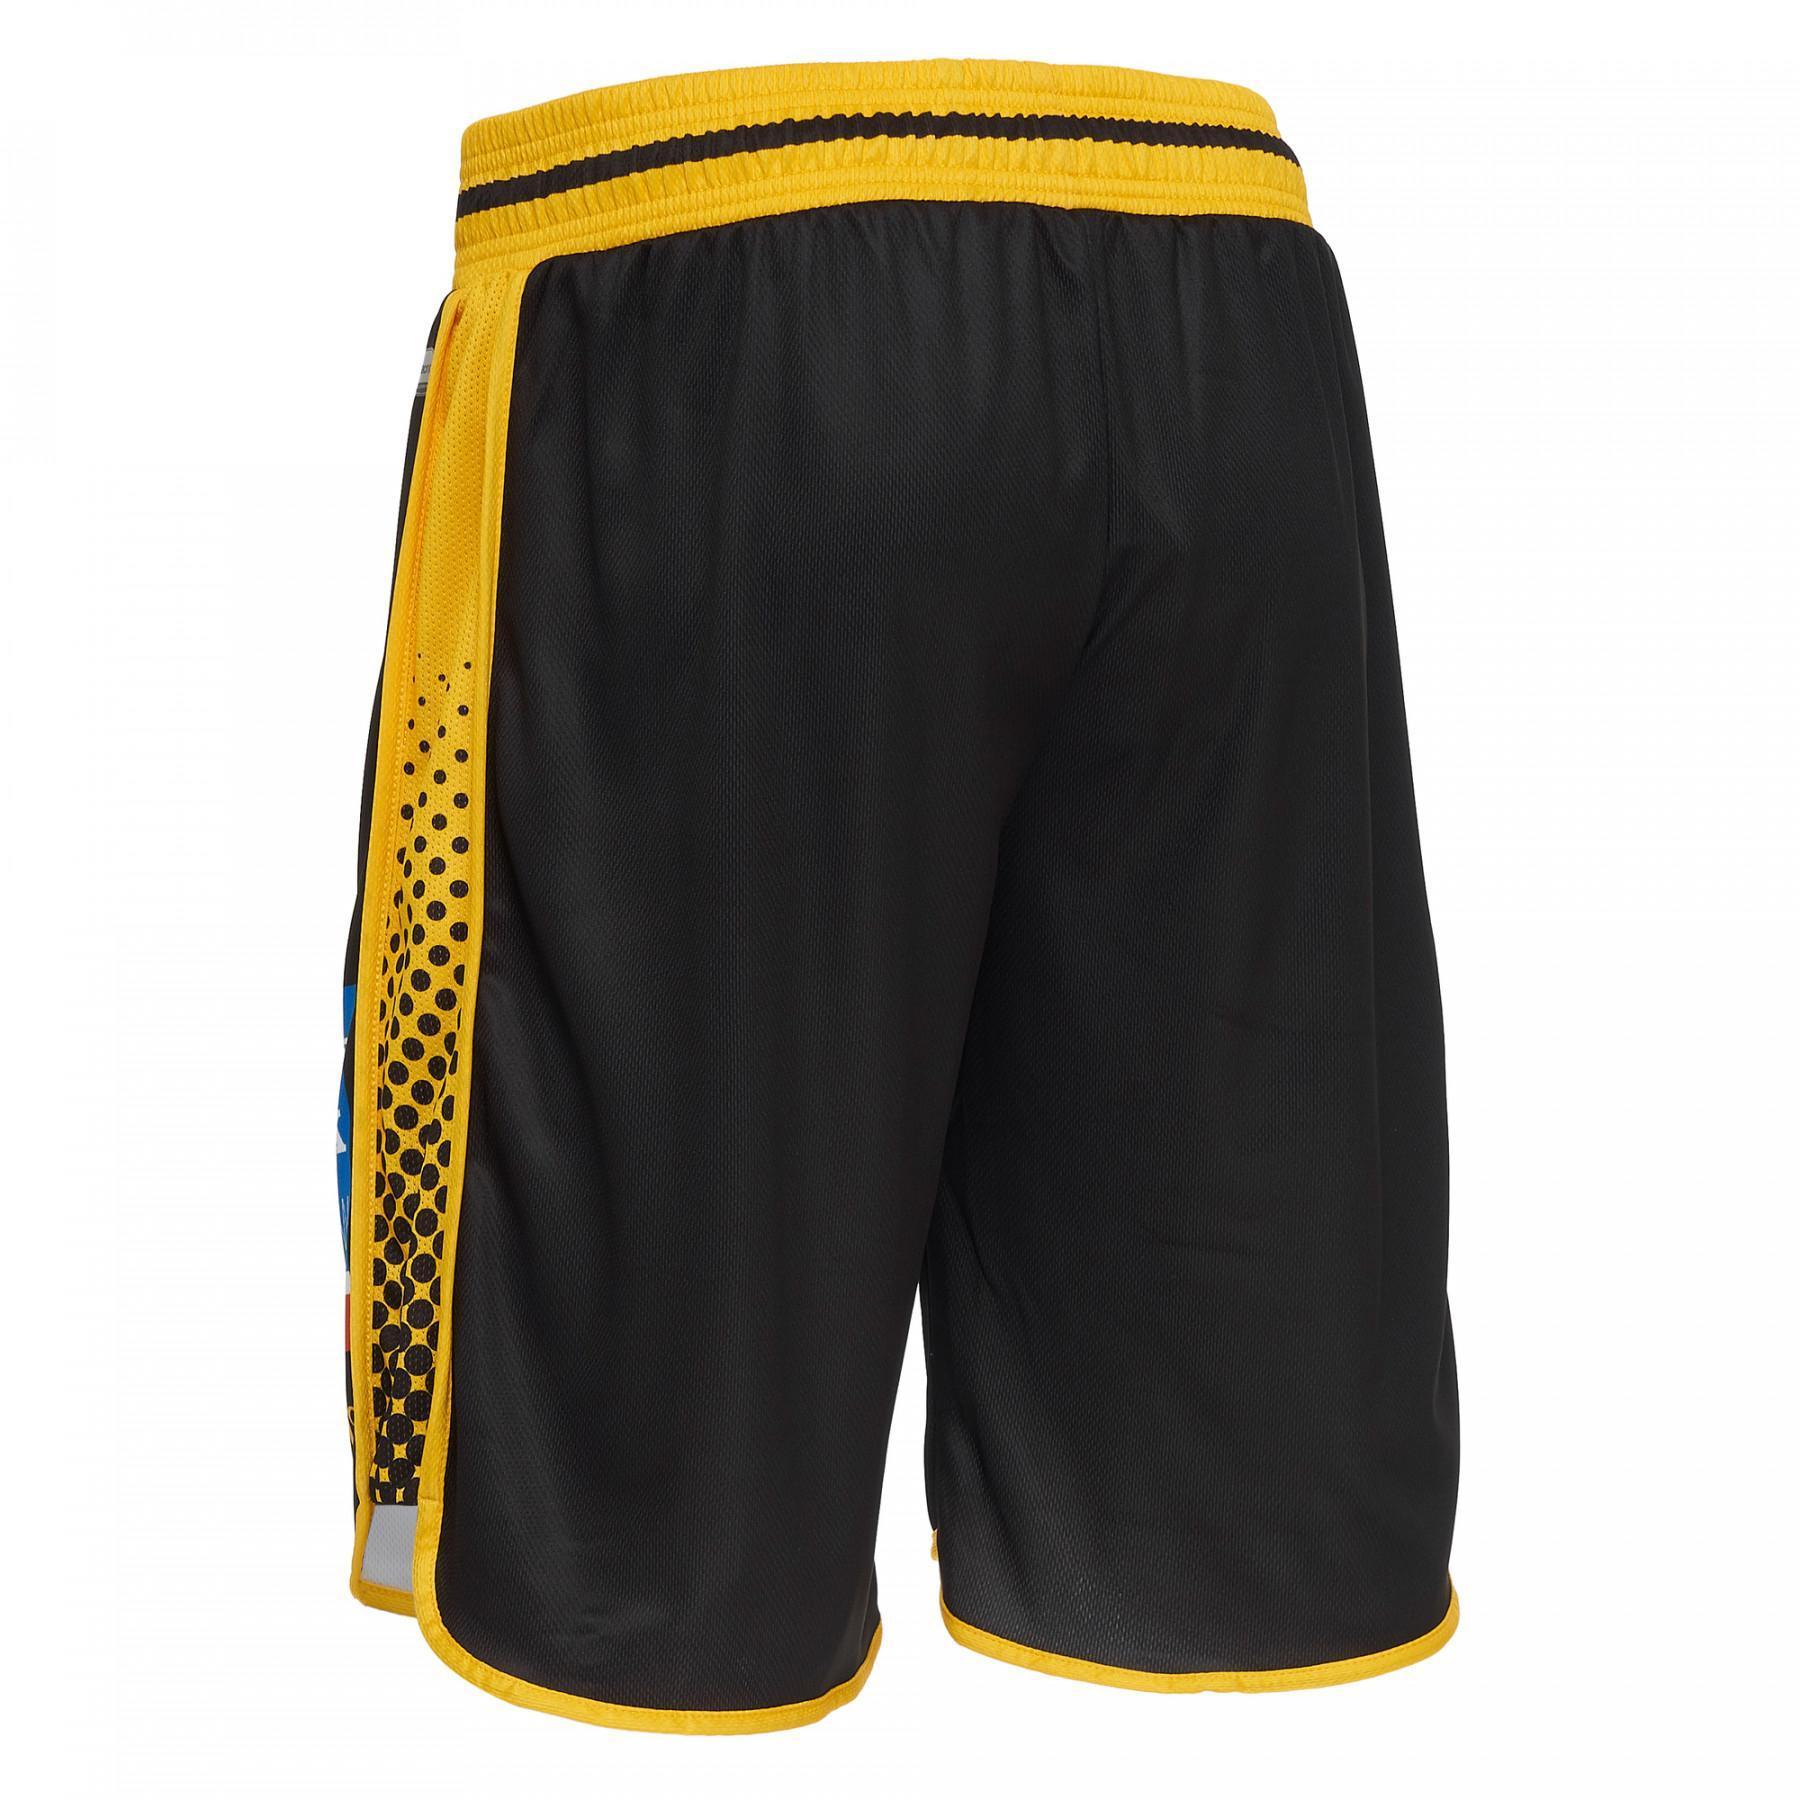 Outdoor-Shorts MHP Riesen Ludwigsburg 18/19